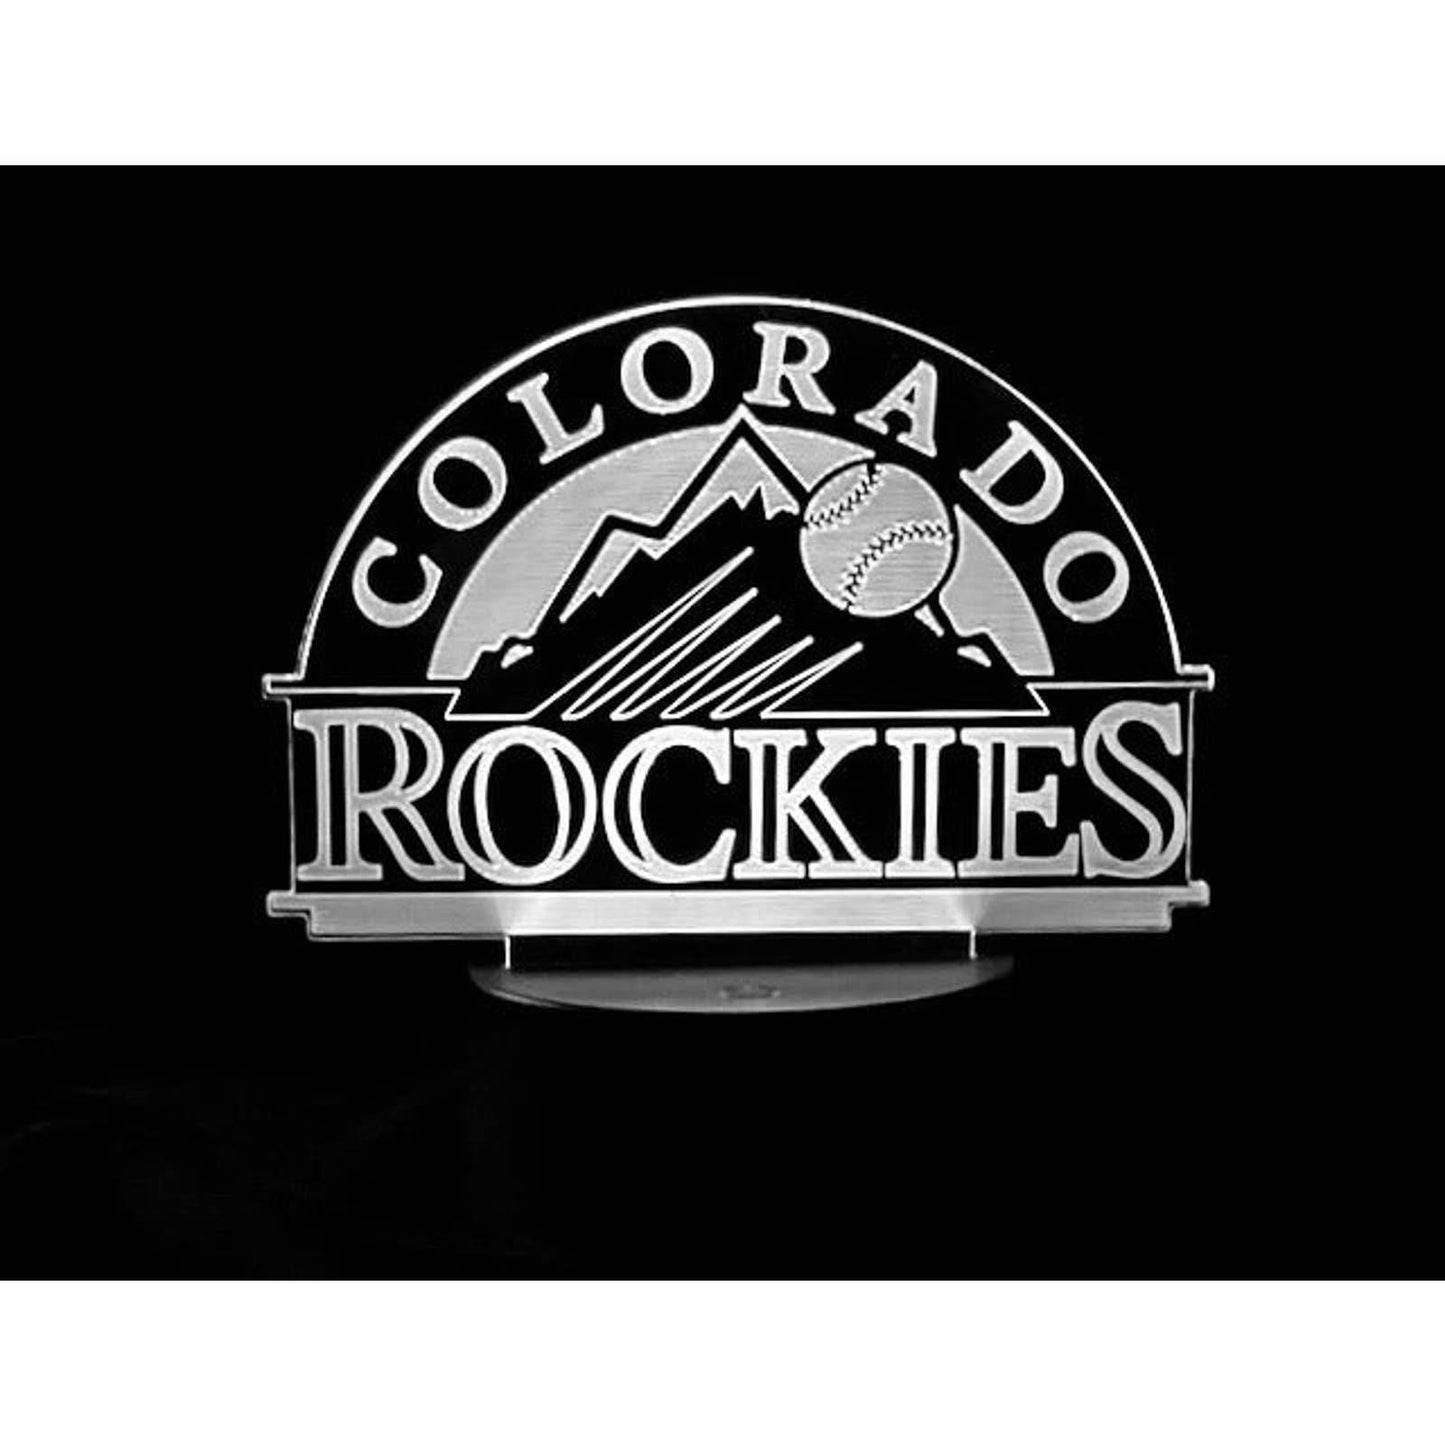 Colorado Rockies 3D LED Night-Light 7 Color Changing Lamp w/ Touch Switch